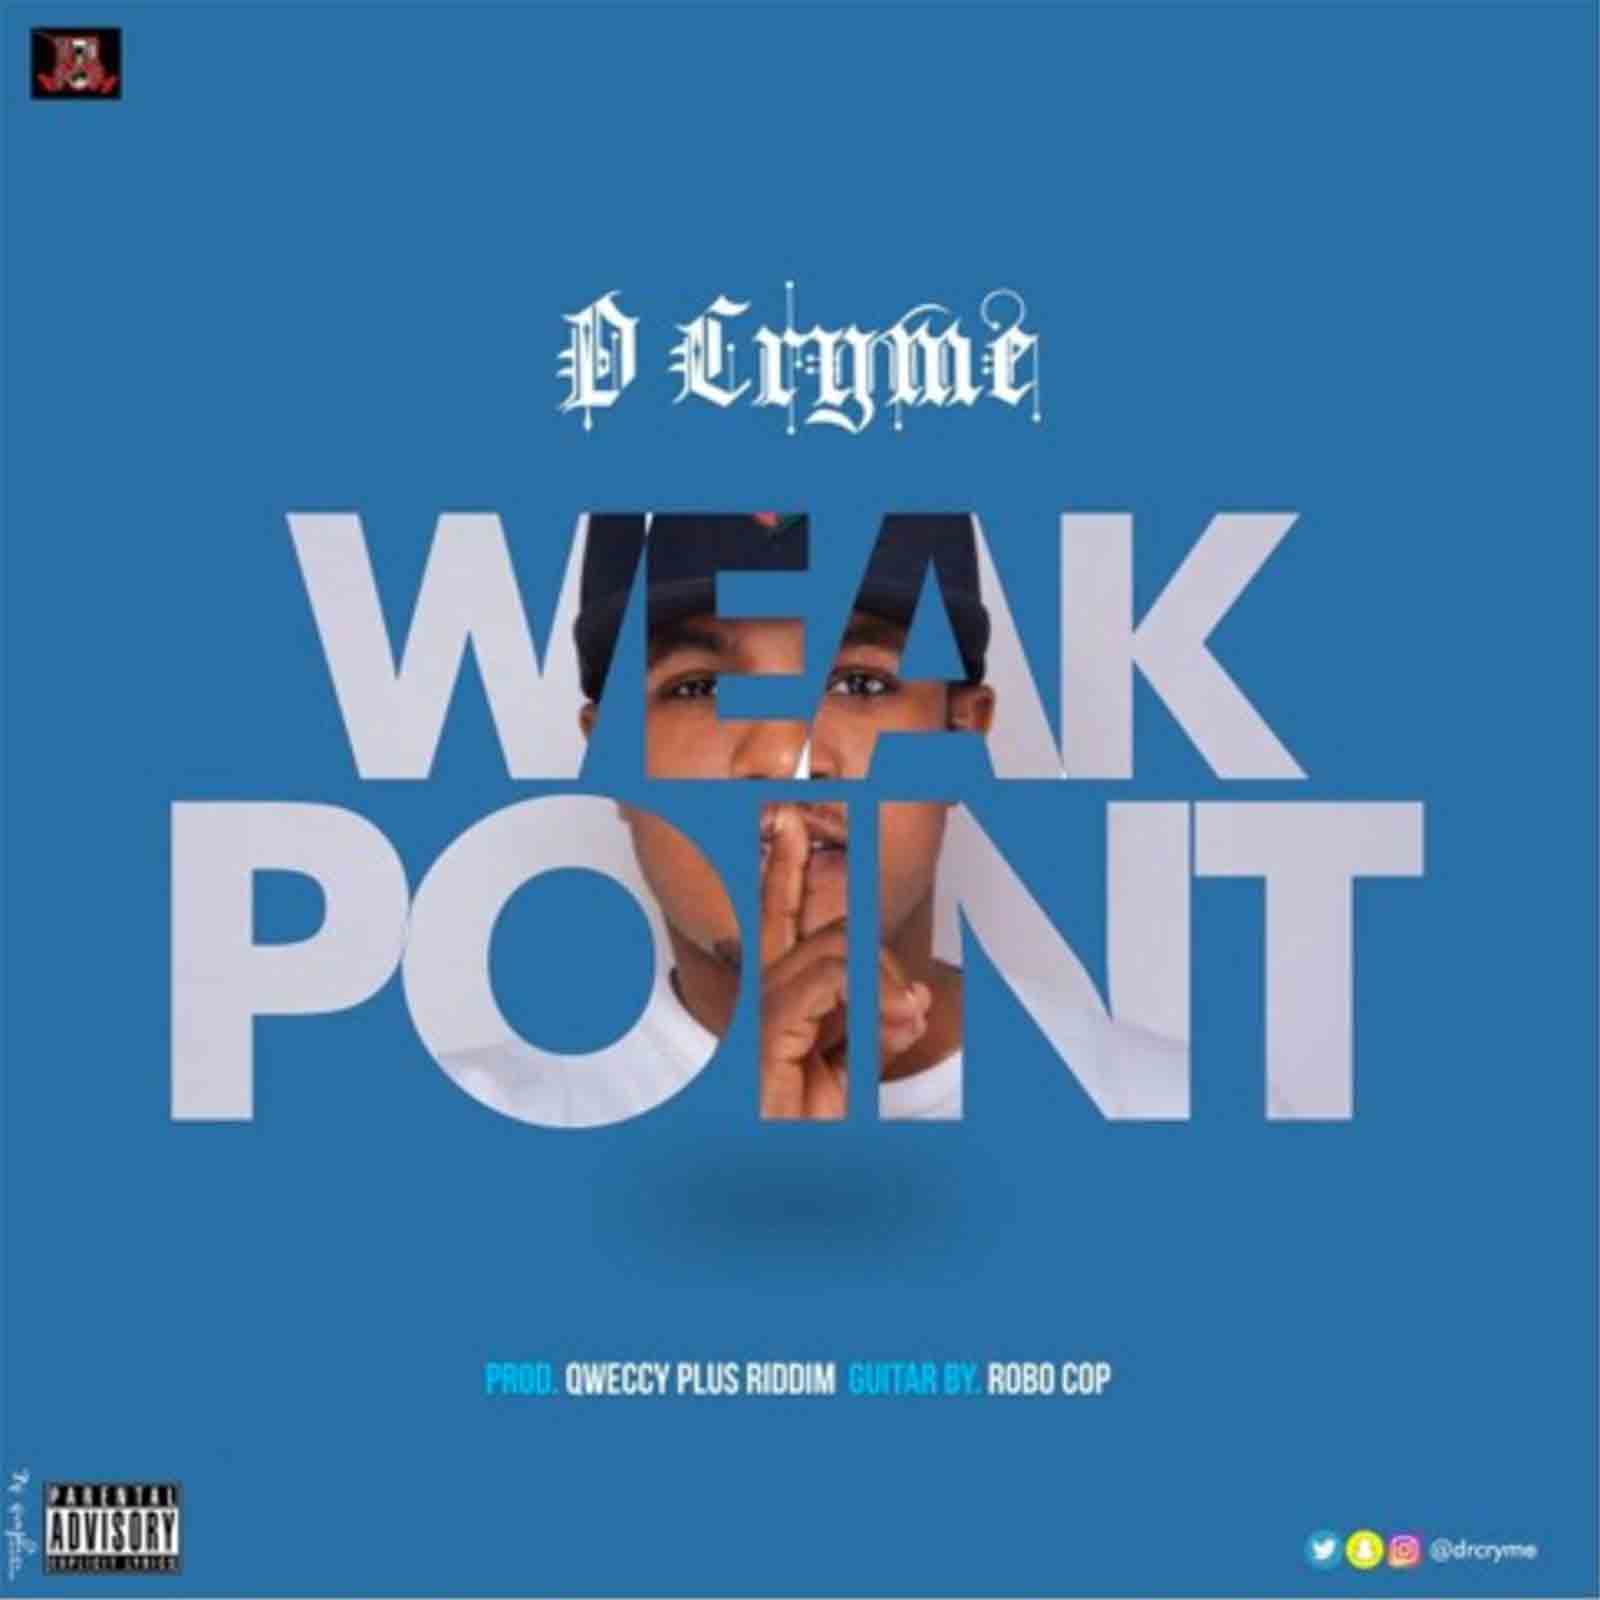 Weak Point by D Cryme